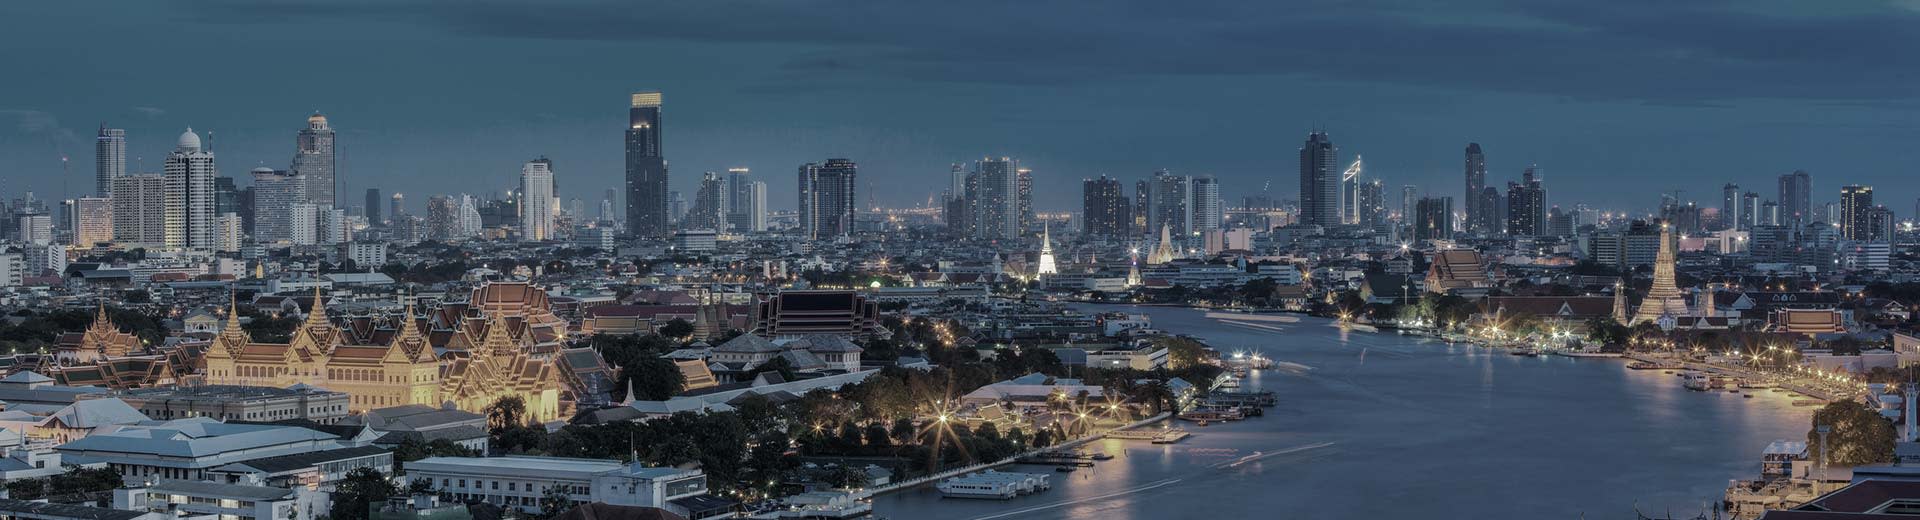 View of Bangkok skyline on a clear evening with the city lights creating a glow.